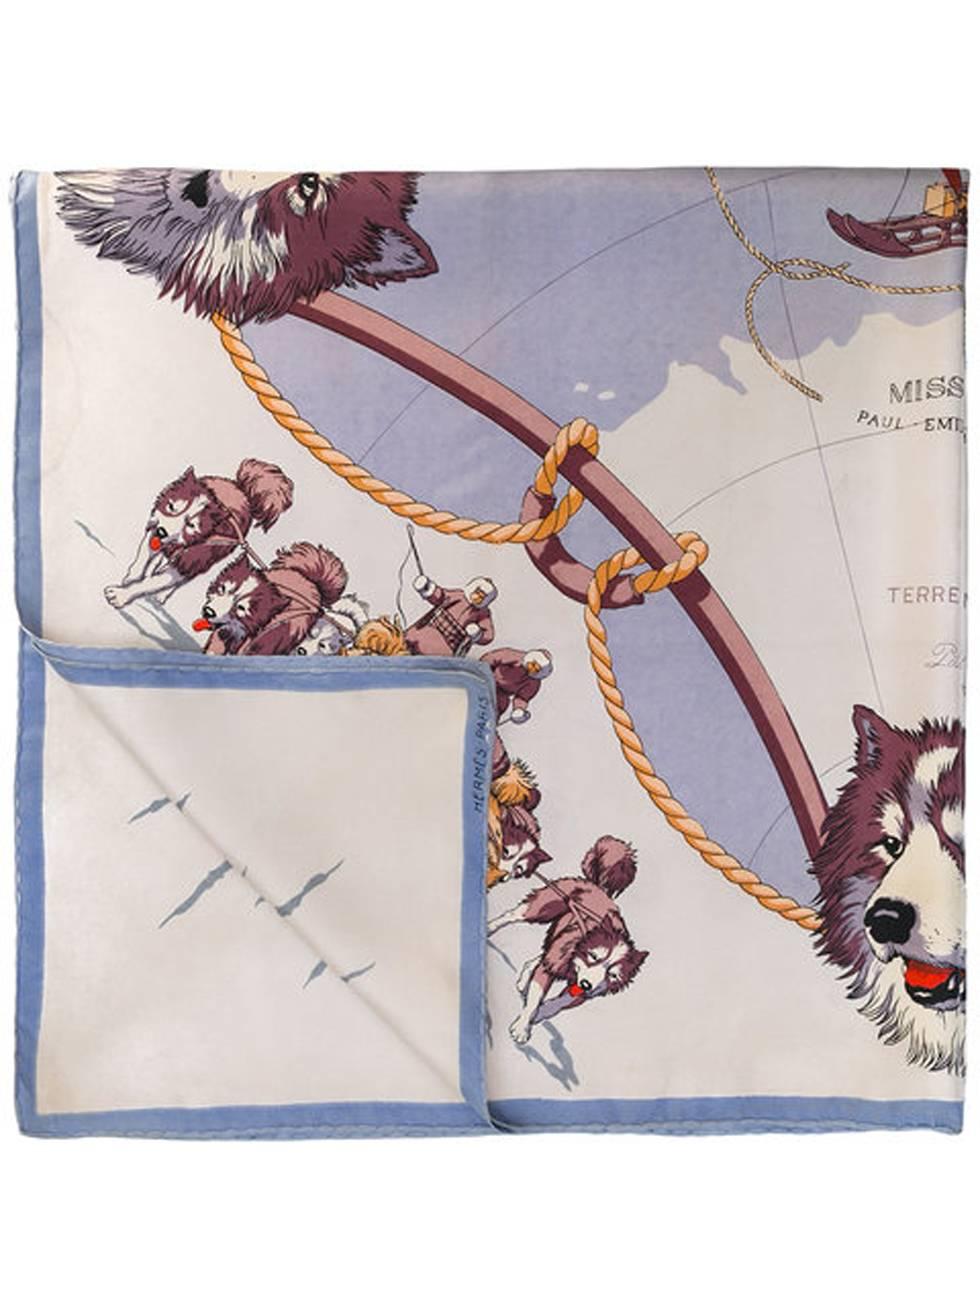 Rare 1951s Mission Paul Emile Victor Hermès blue silk scarf featuring an polar scenic print. 
Circa 1951. 90cm x 90cm 
In good vintage condition. Made in France.
Please see all details on the photos some spots could be on as per photos.